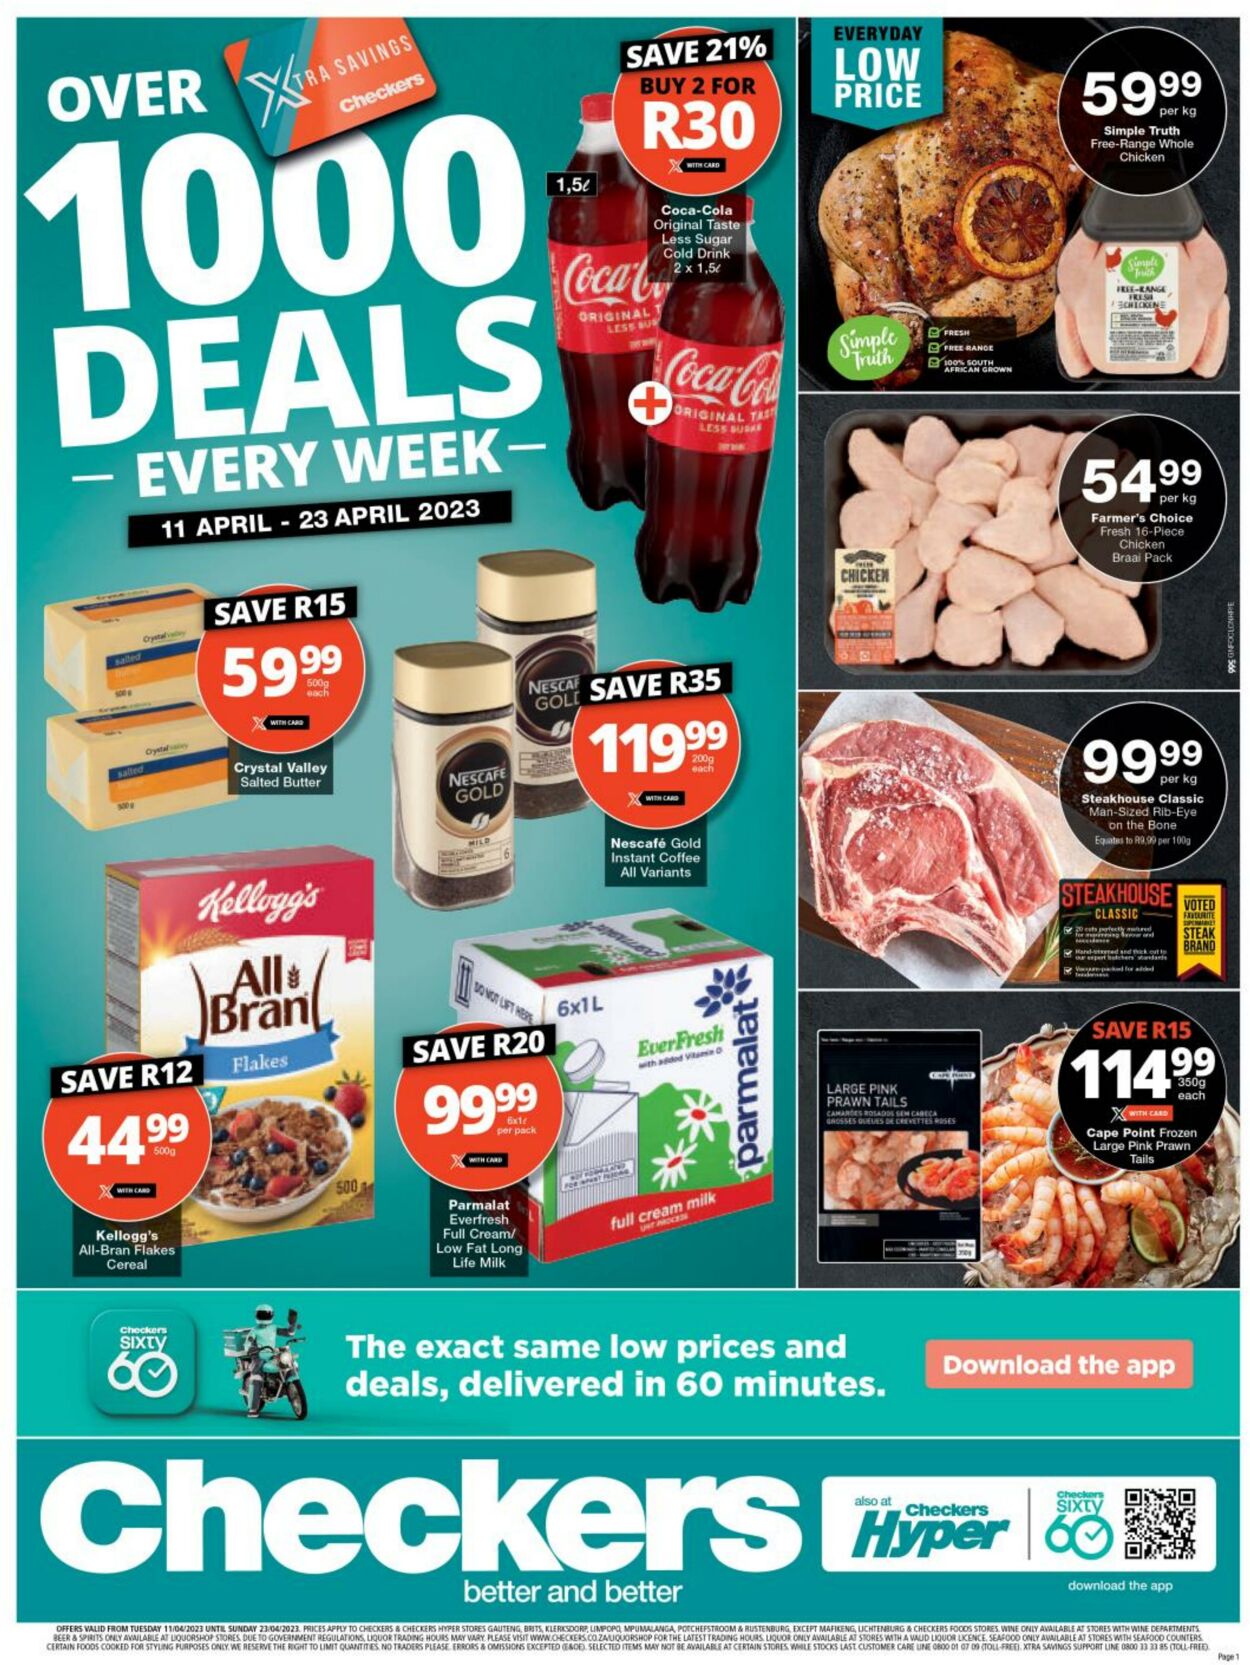 Checkers Promotional Leaflet Valid from 11.04 to 23.04 Page nb 1